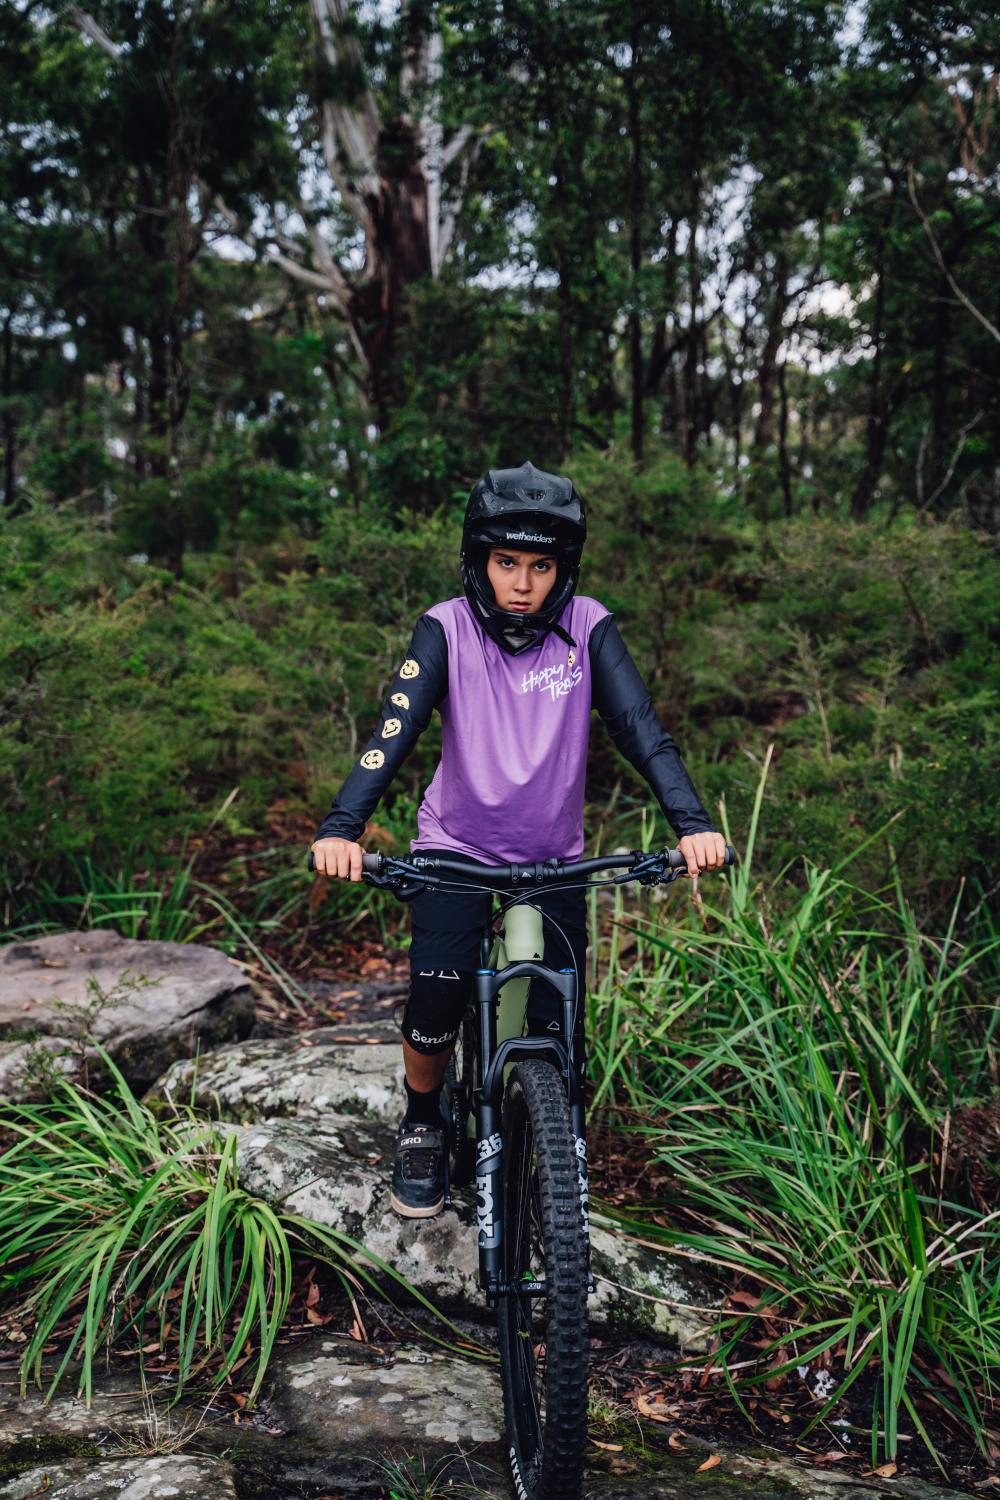 Happy Trails Youth Jersey - Purple